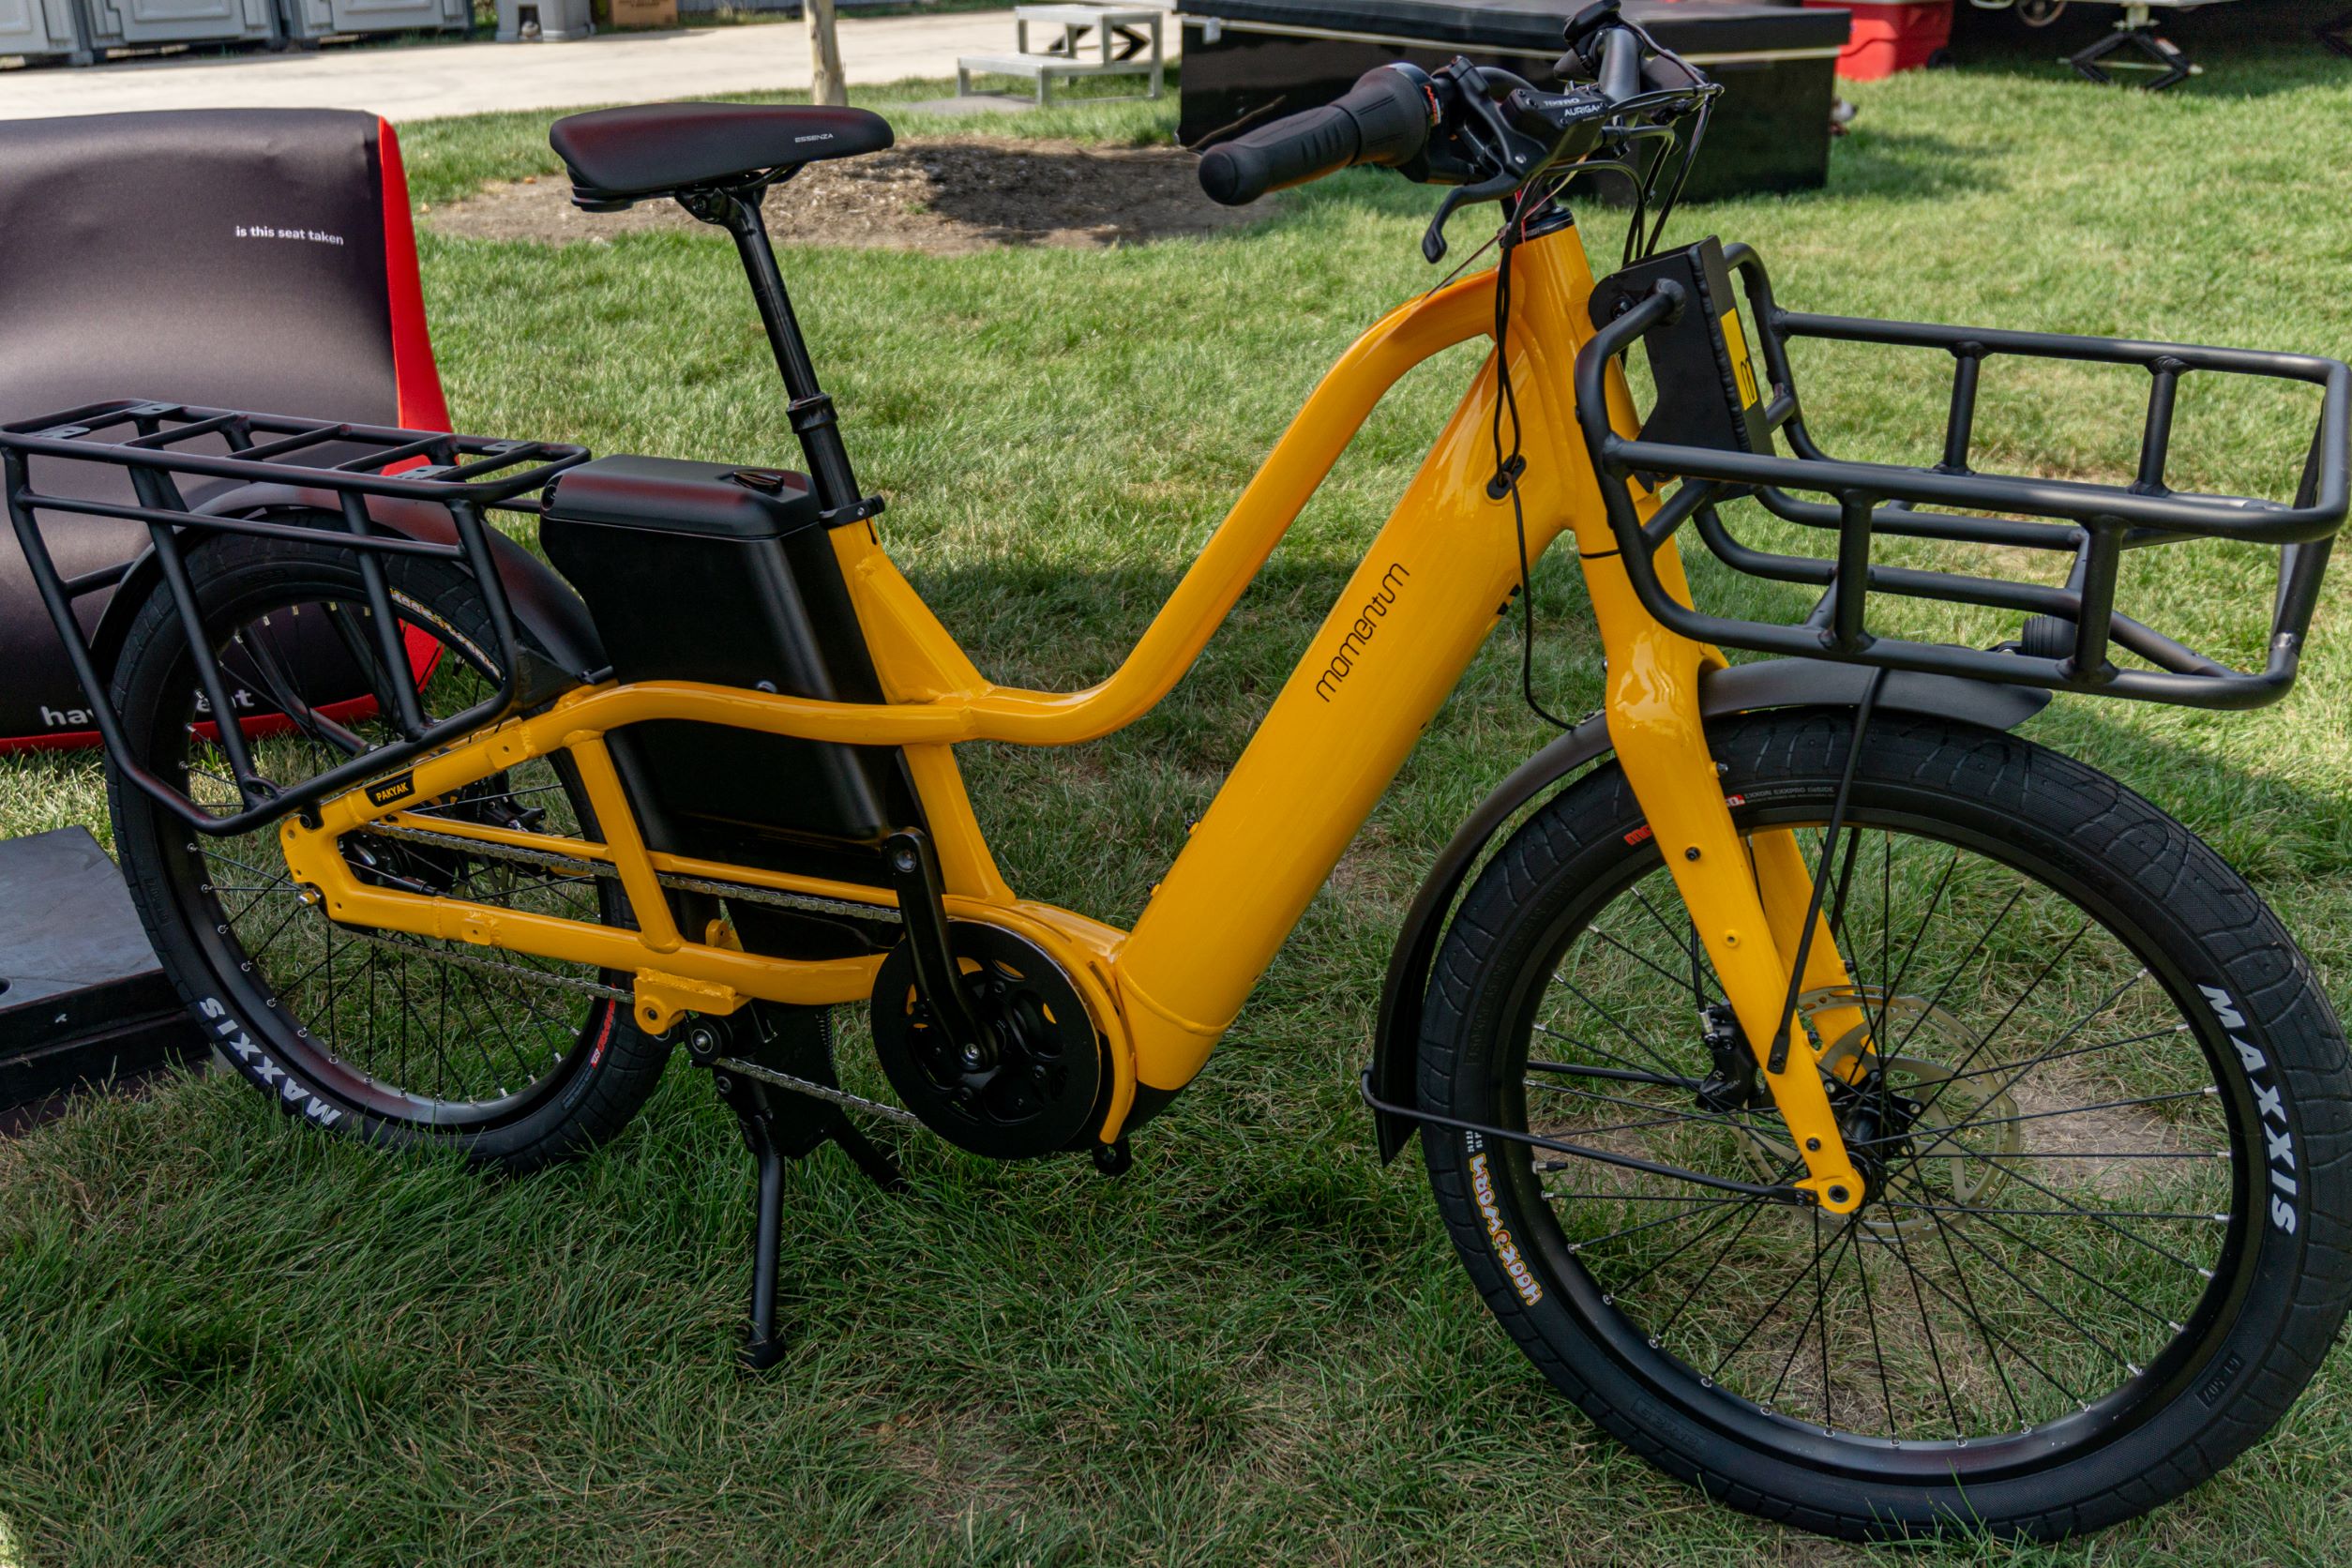 The right side view of a yellow-and-black 2022 Momentum Pakyak E+ under a canopy